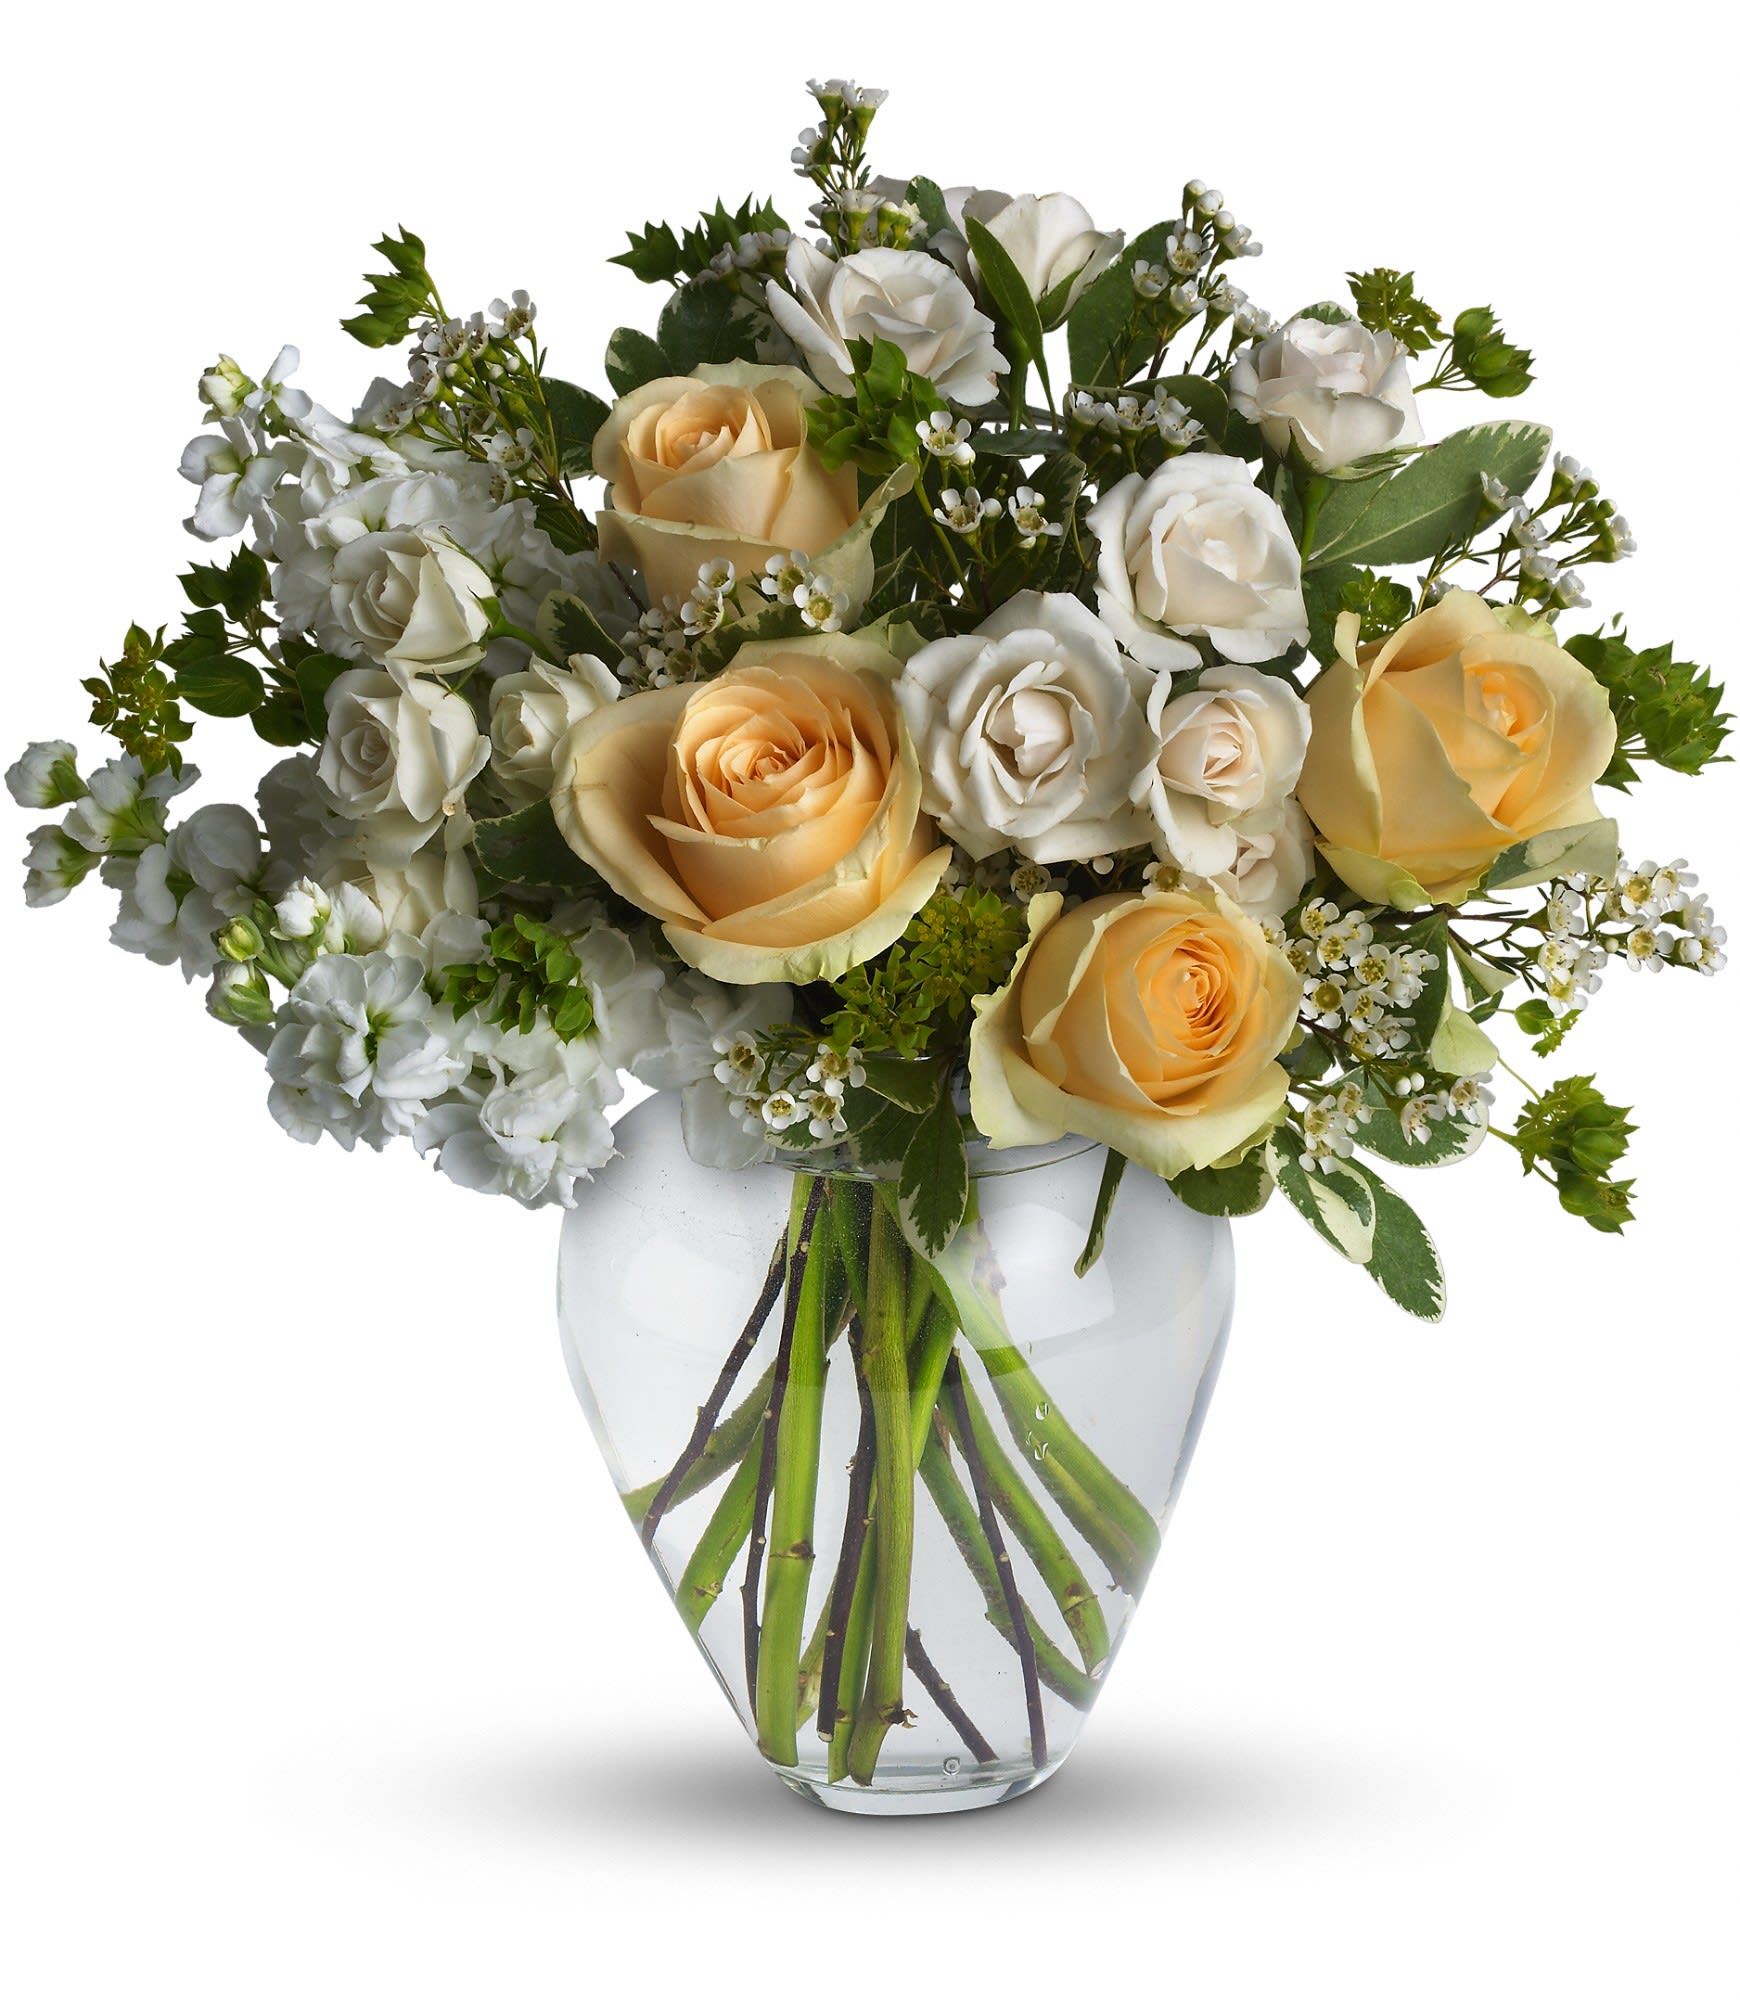 Celestial love - Peaceful and pure. This pretty arrangement of white and light colors will let anyone know they are in your thoughts.   Fresh flowers such as peach roses, crÃ¨me spray roses, white stock, waxflower and more are gathered in a beautiful clear vase. Approximately 16&quot; W x 16&quot; H 